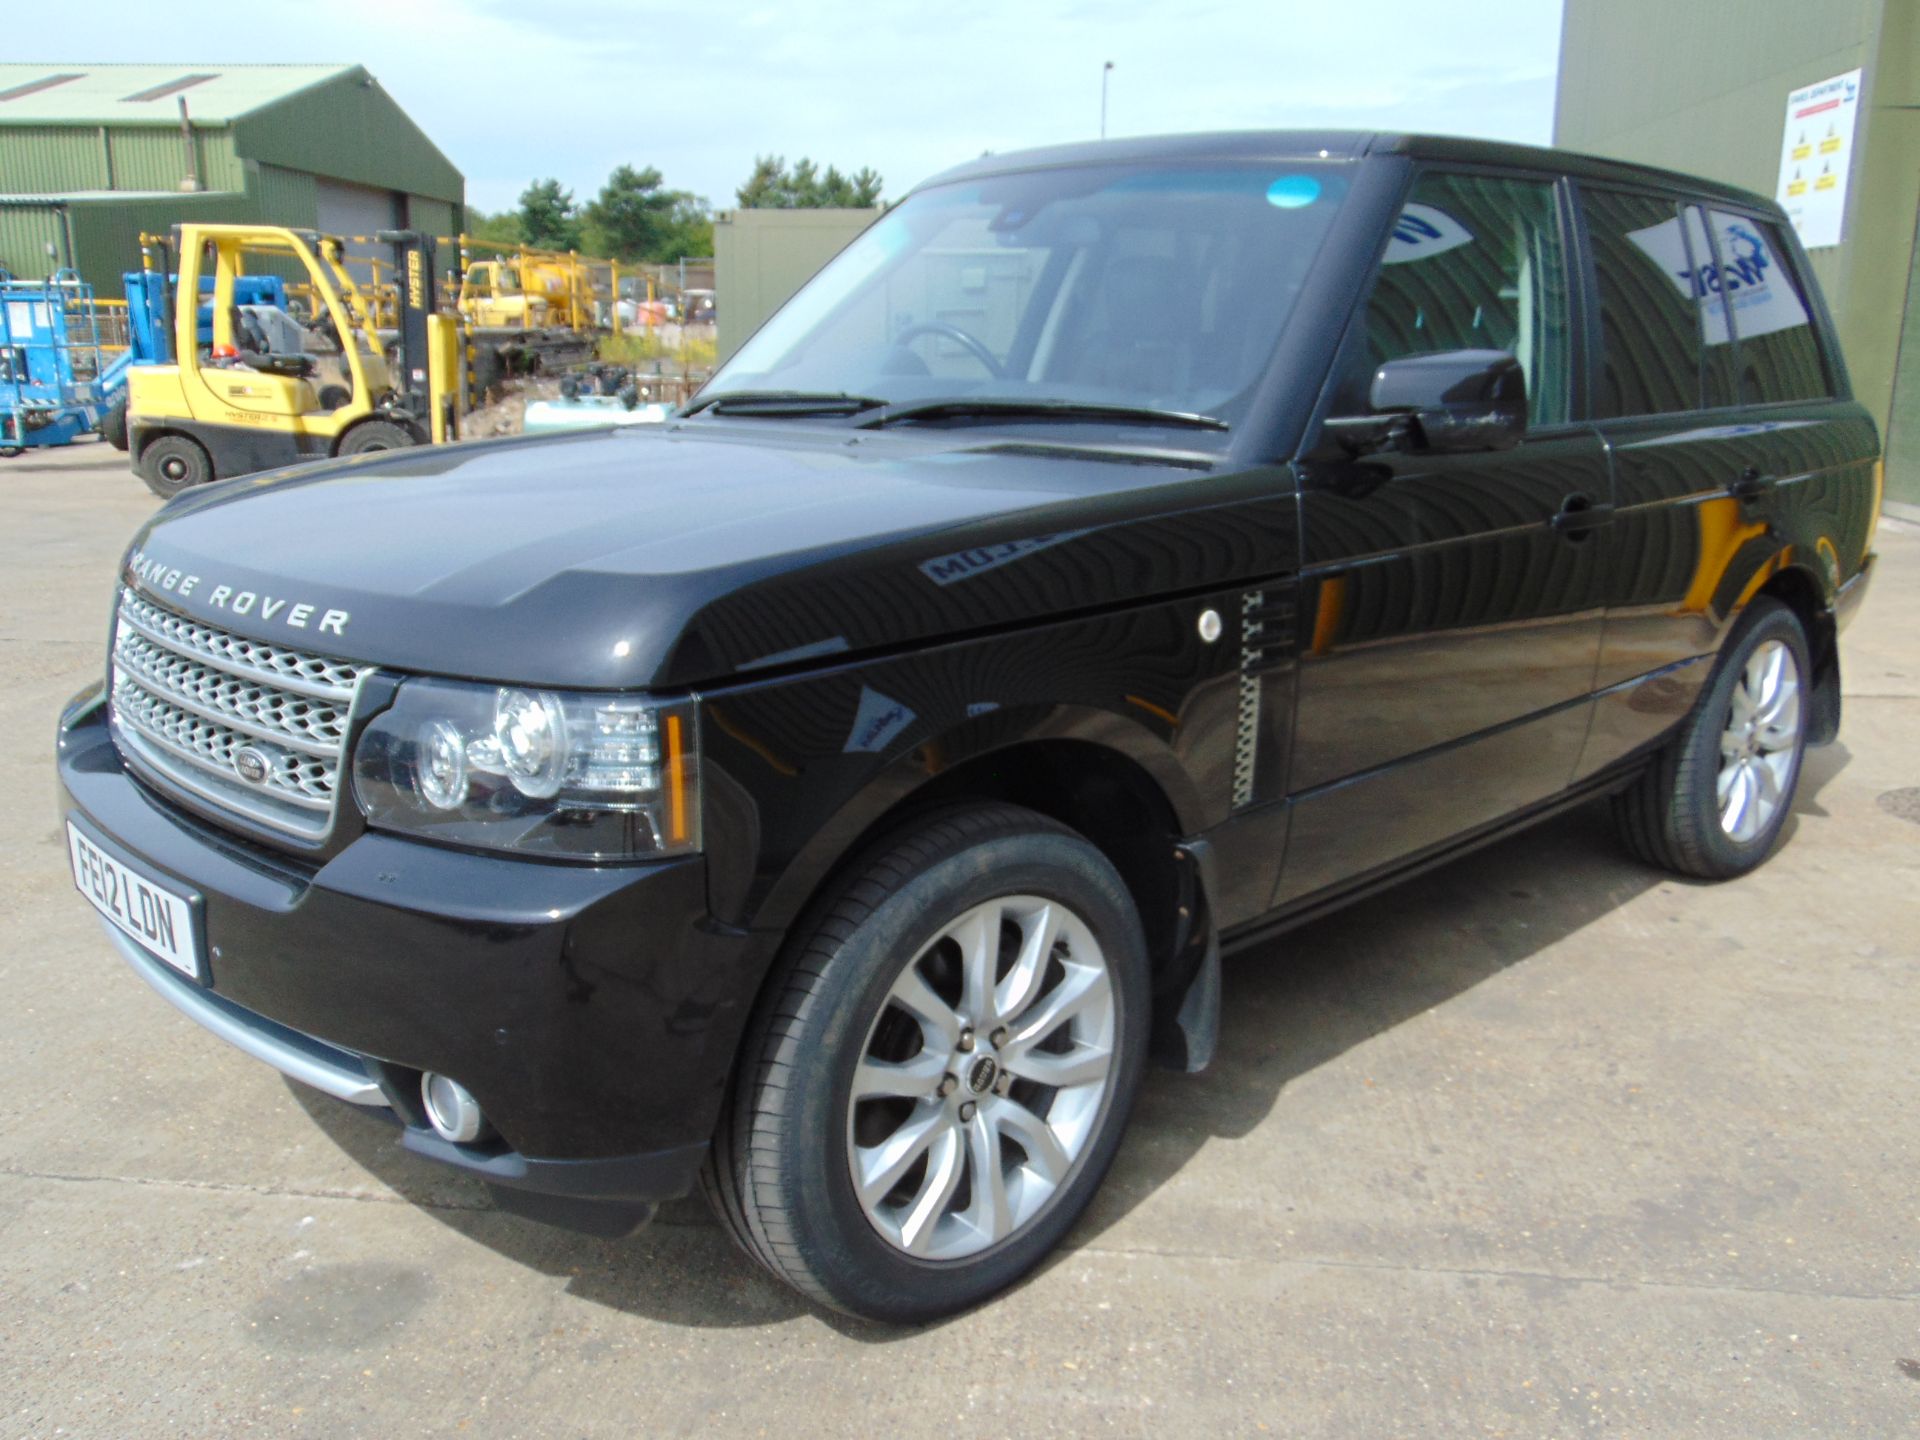 2012 1 Owner From New Range Rover 4.4 TD V8 Westminster Only 58,153 Miles! - Image 5 of 30